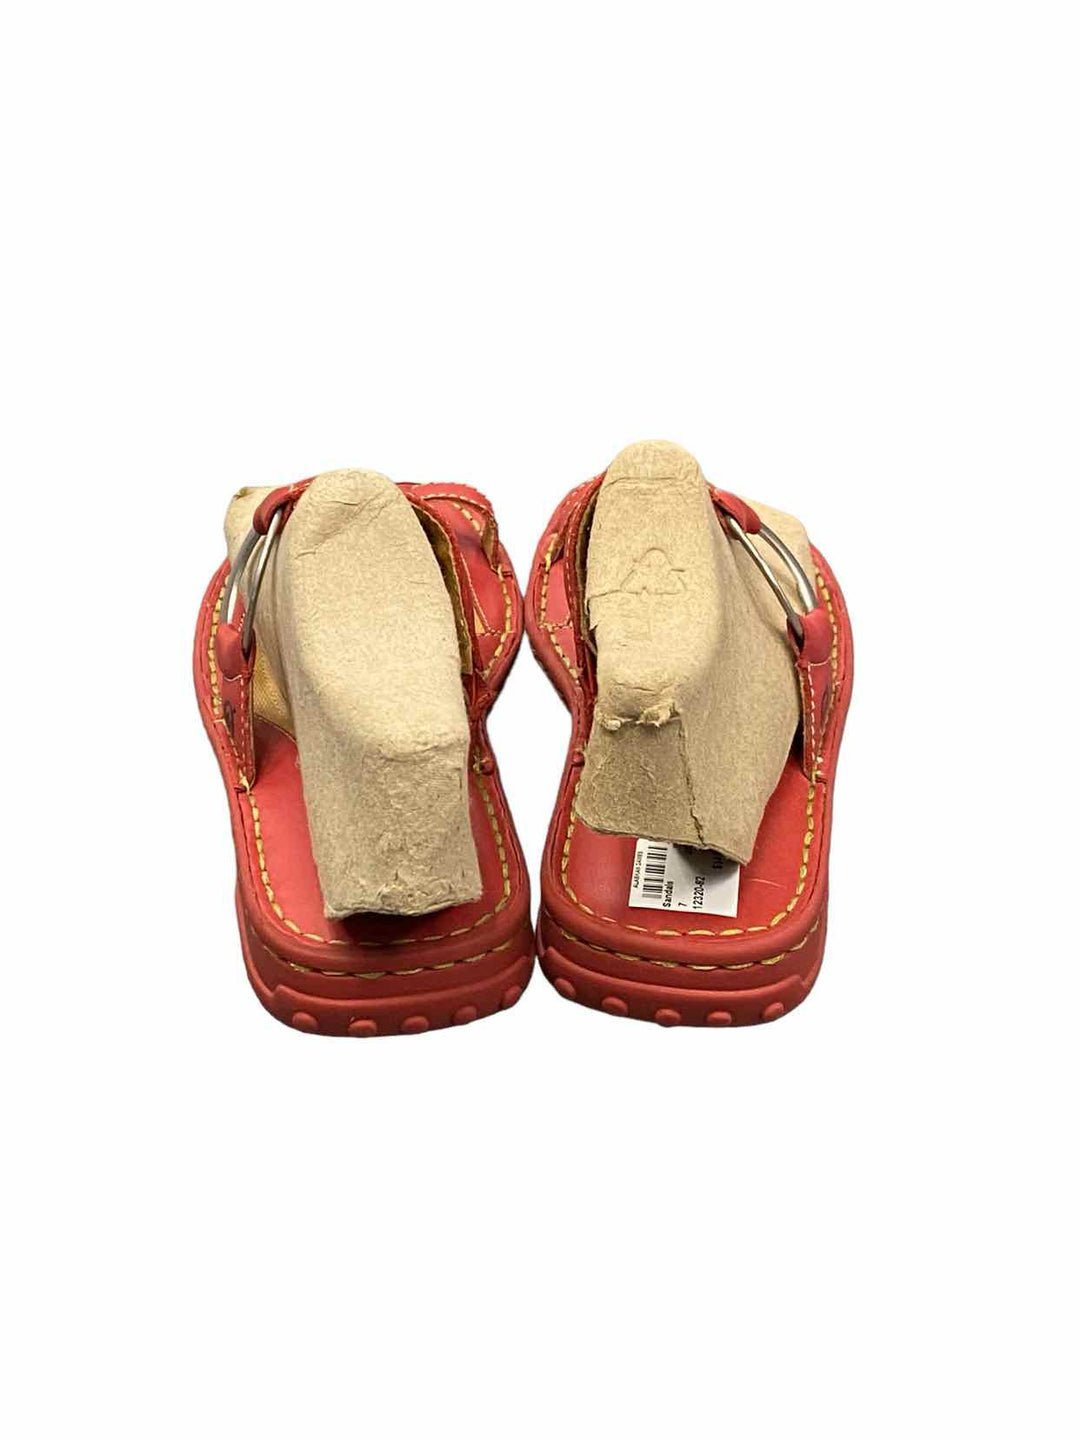 Born Shoe Size 7 Red Leather Sandals